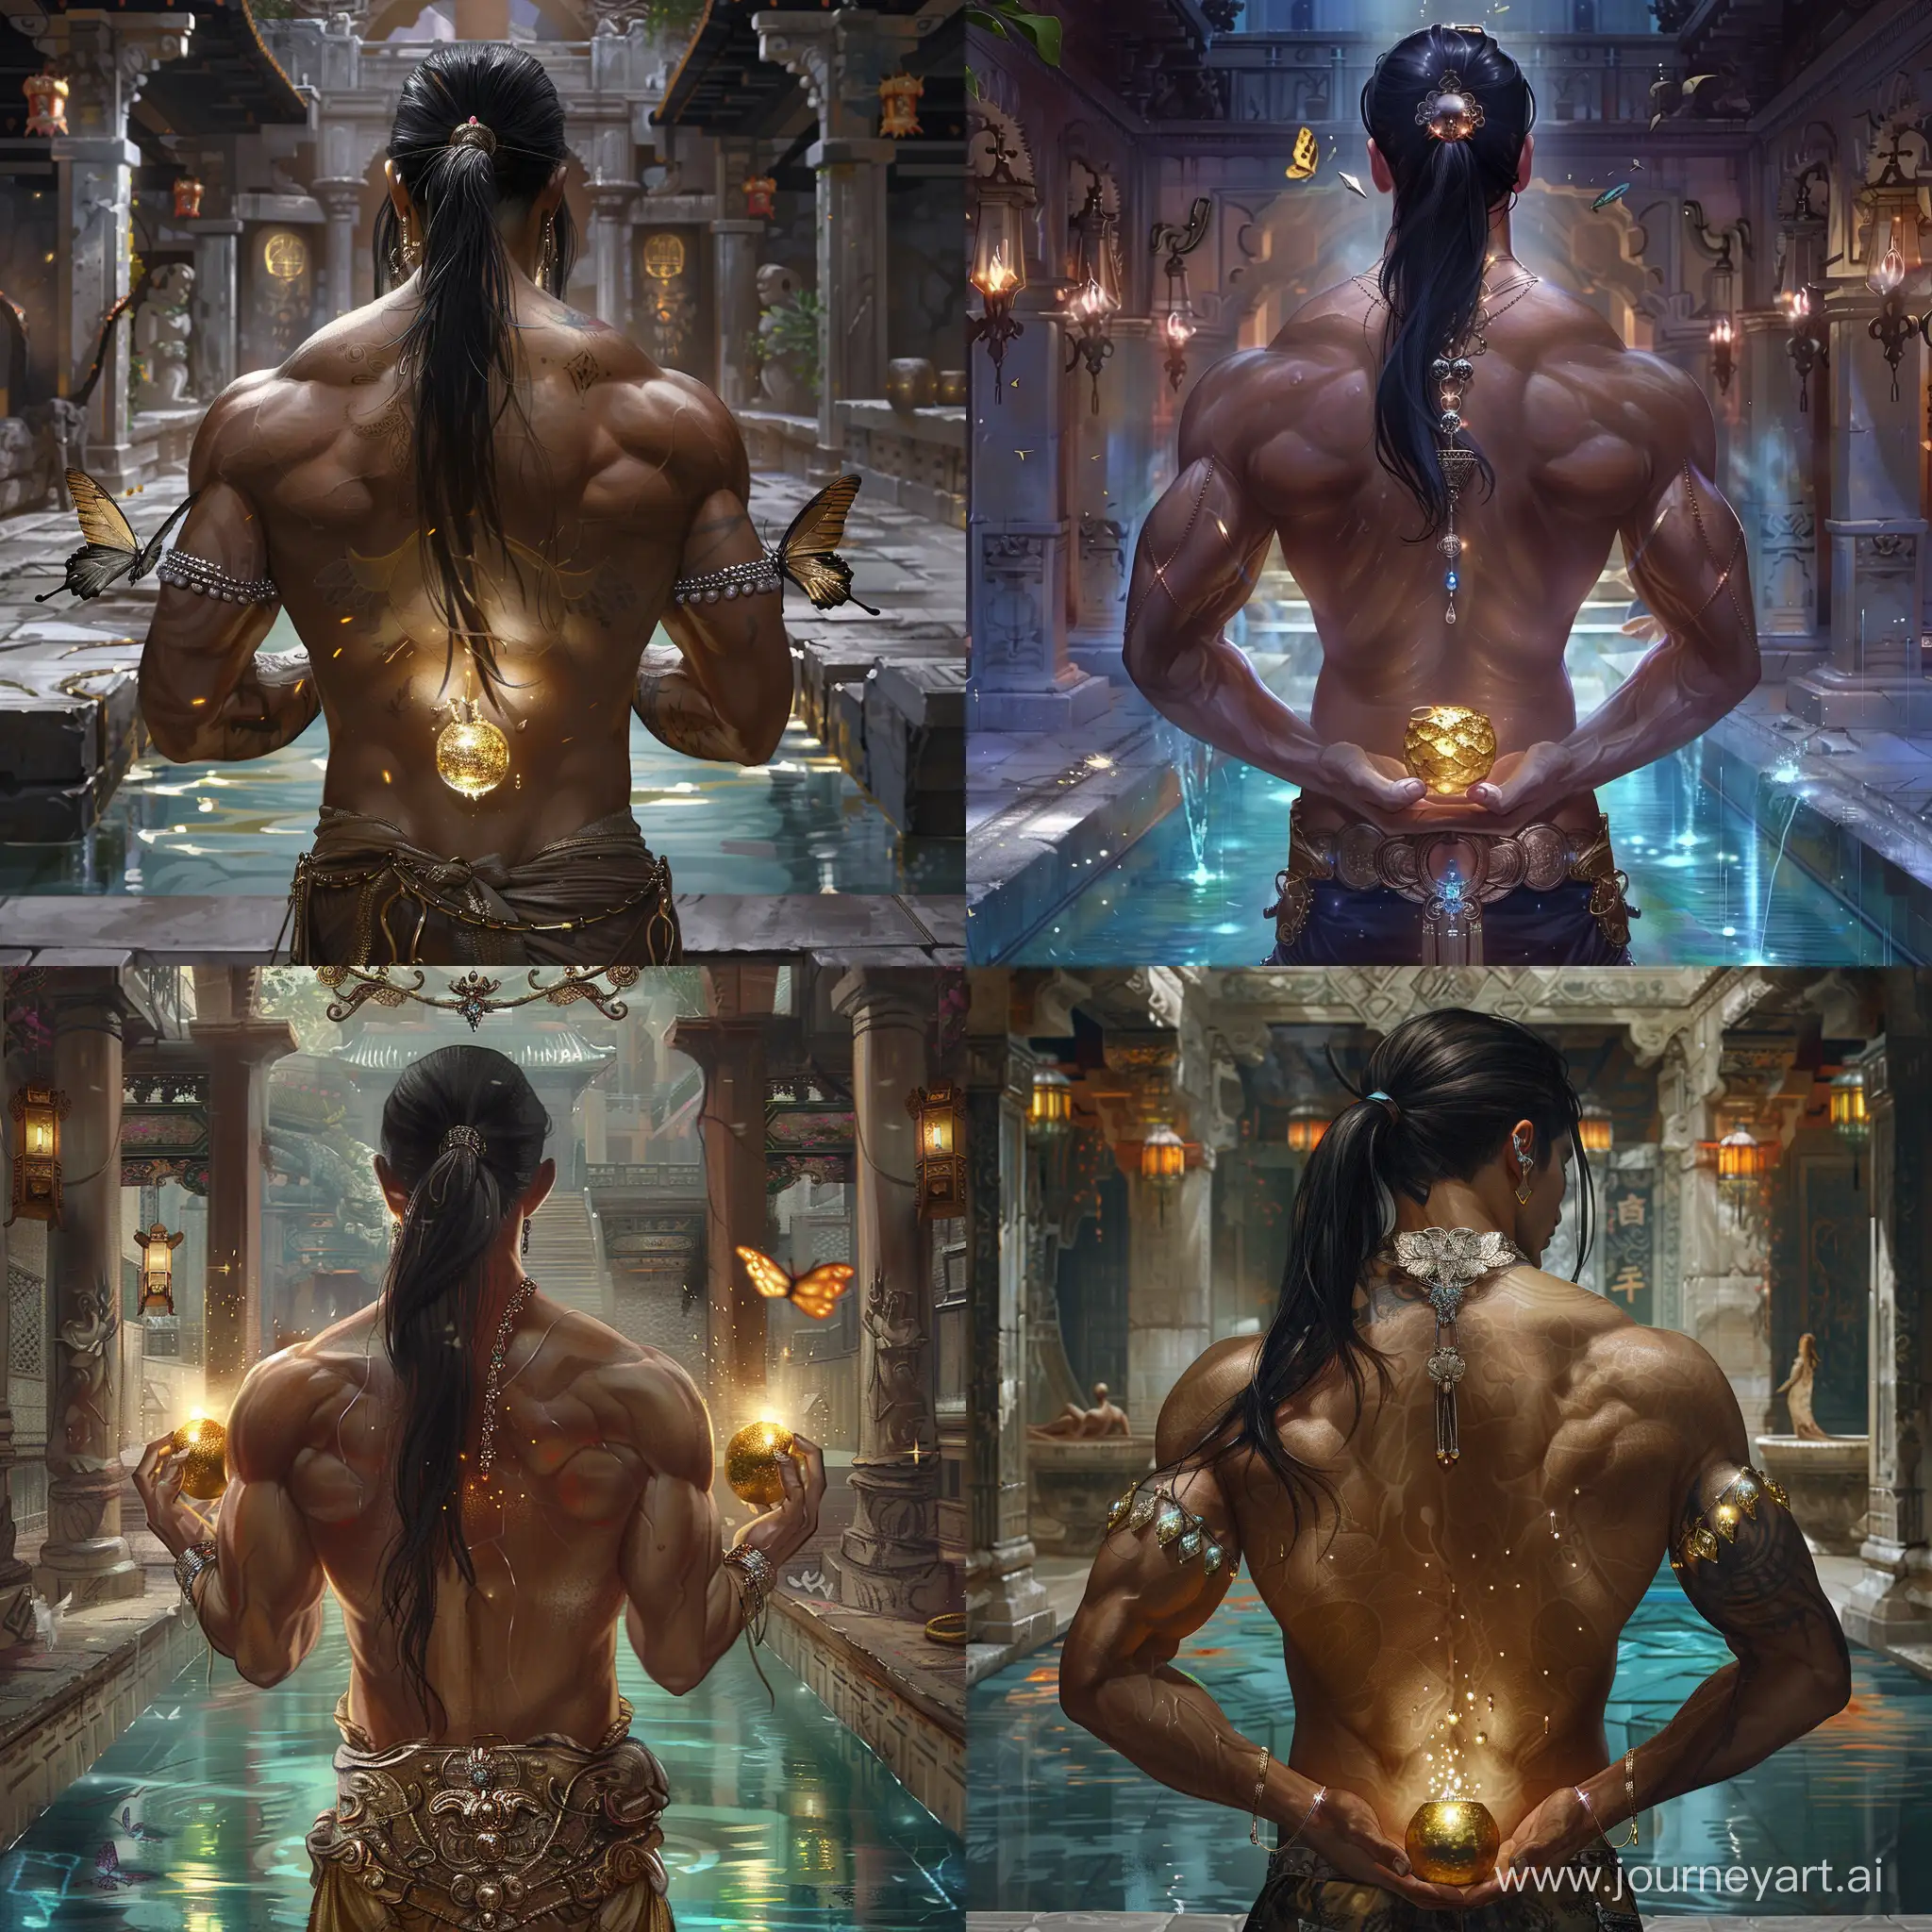 butterfly jewelry, one man from the back, shirtless with muscles, holding a golden apple in hands, backside, danmei artstyle, semi realistic art, beautiful interior ancient pool architecture background, magical water glowing, asian fantasy background, magical glow, silver jewels, long luxurious black hair ponytaul